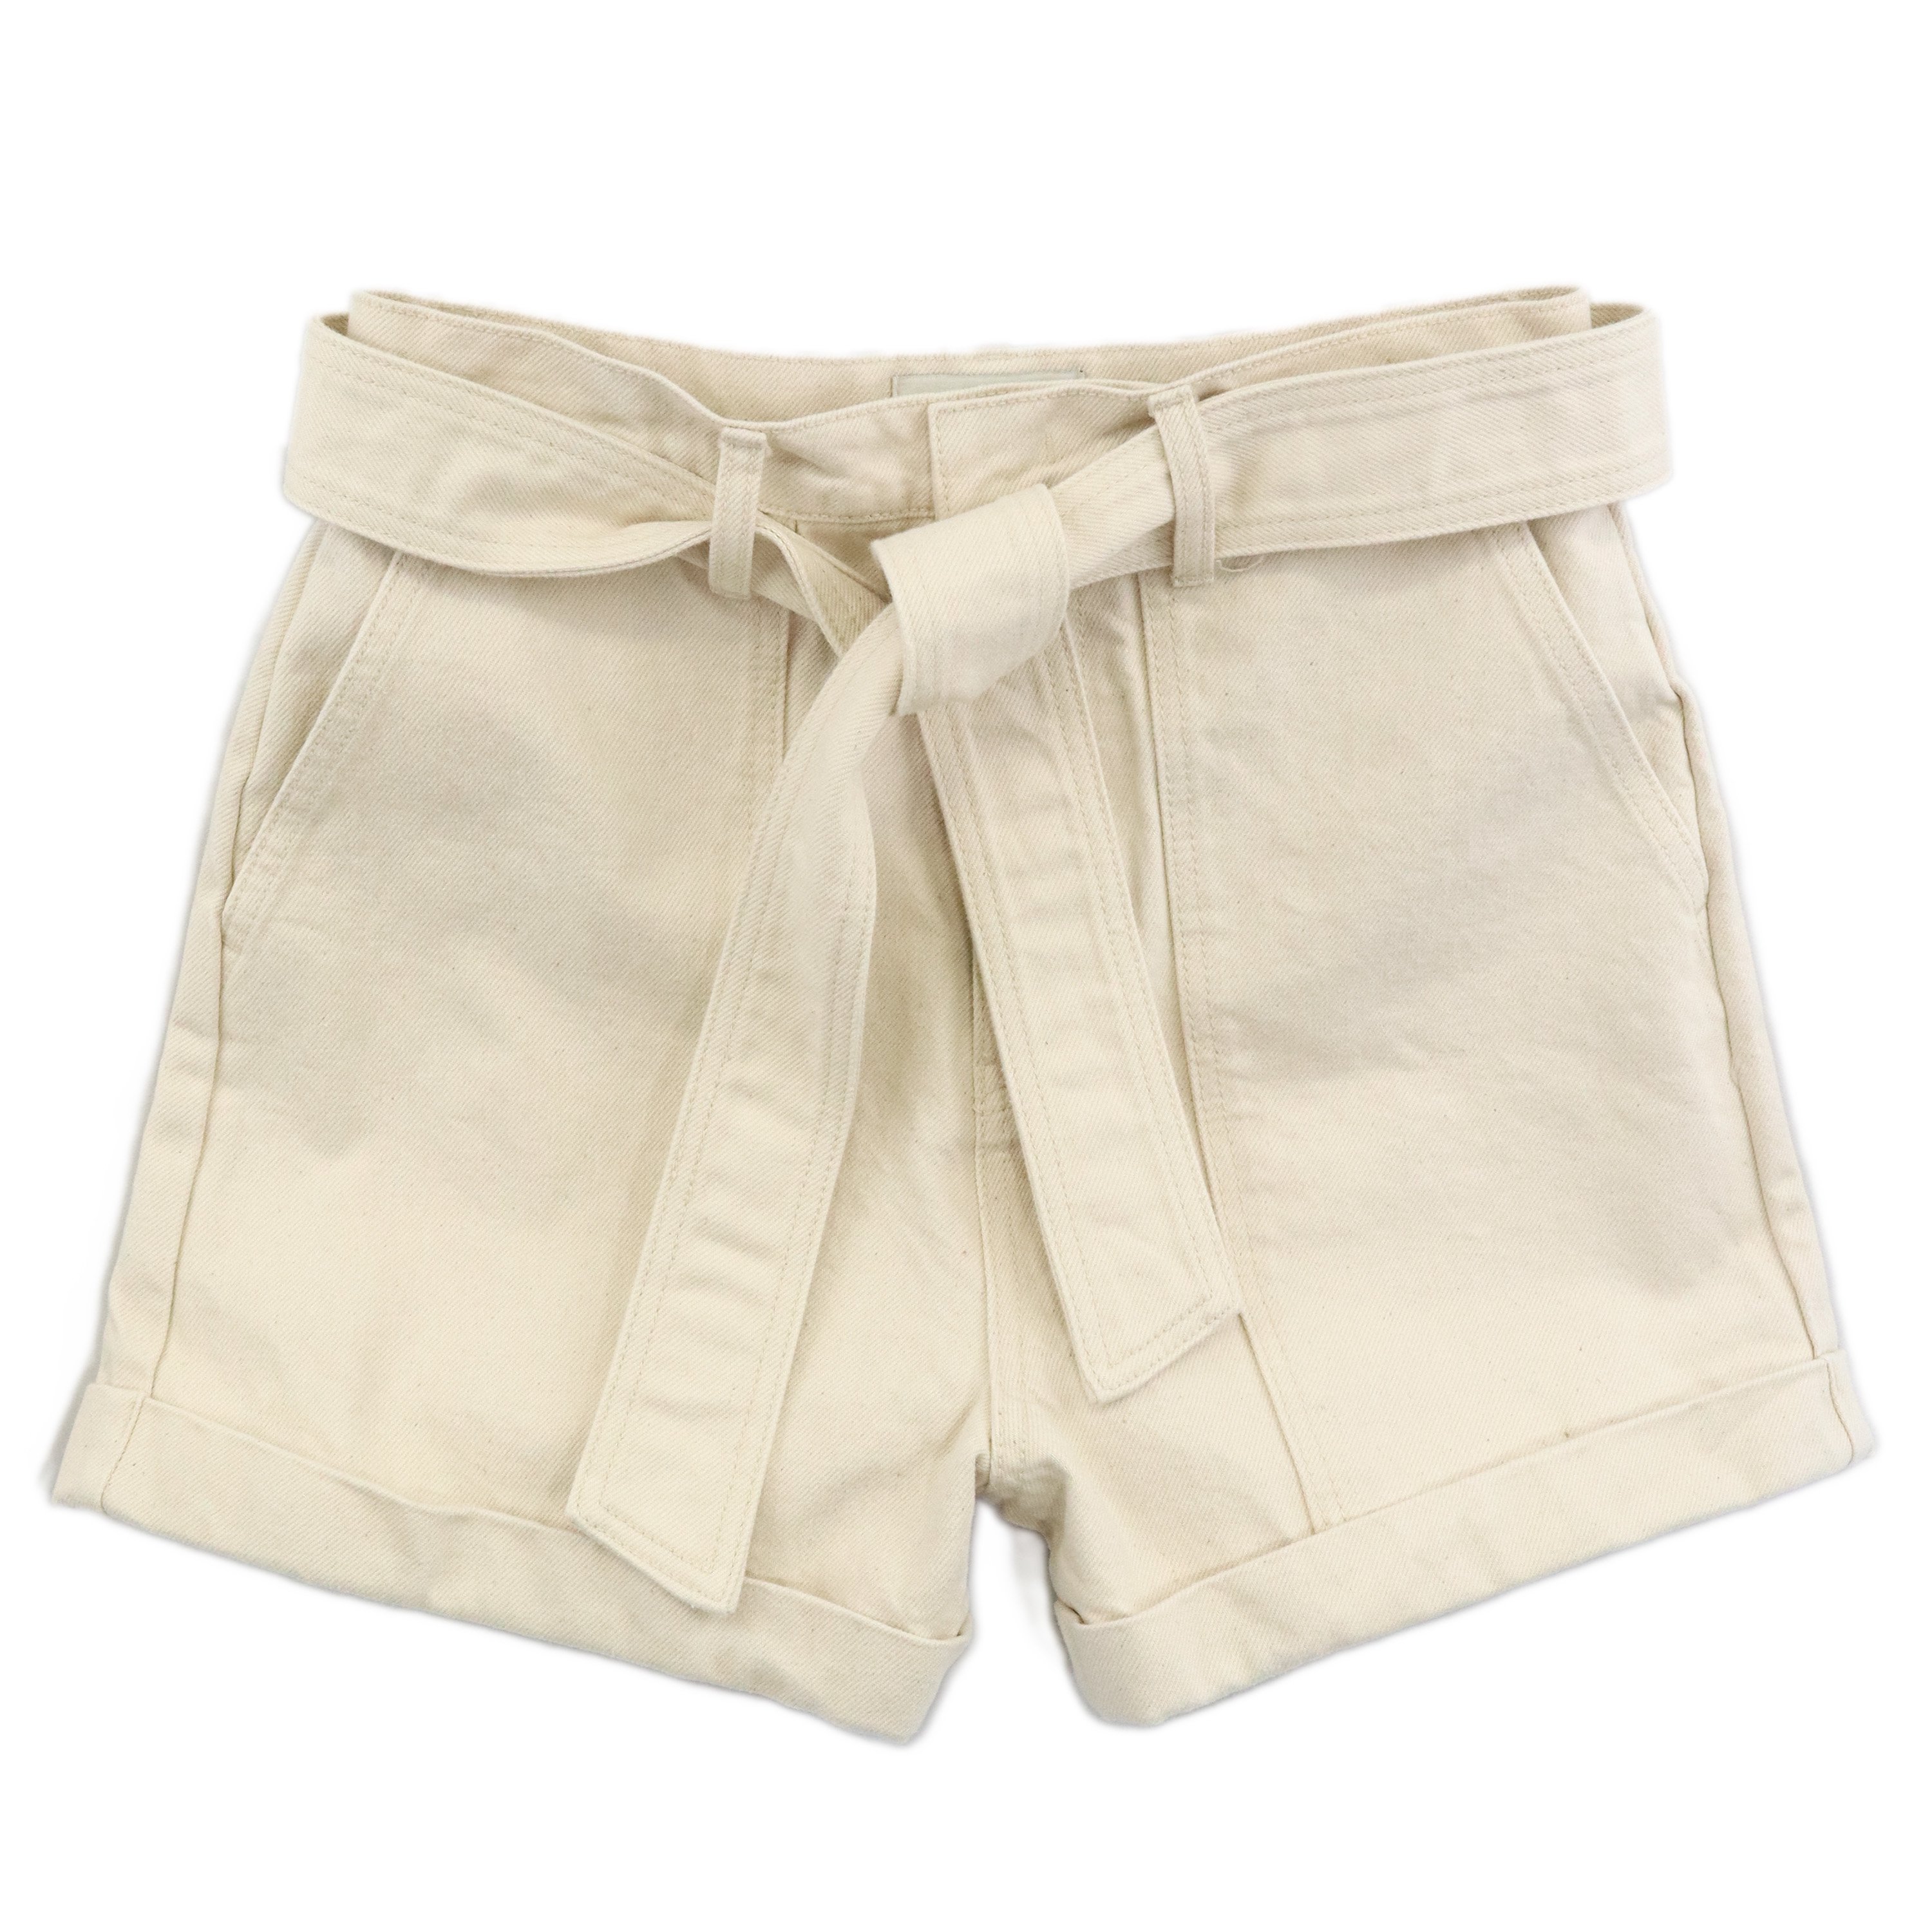 <img class='new_mark_img1' src='https://img.shop-pro.jp/img/new/icons6.gif' style='border:none;display:inline;margin:0px;padding:0px;width:auto;' />RECTO Heavy cotton high-waist shorts (ECRU)